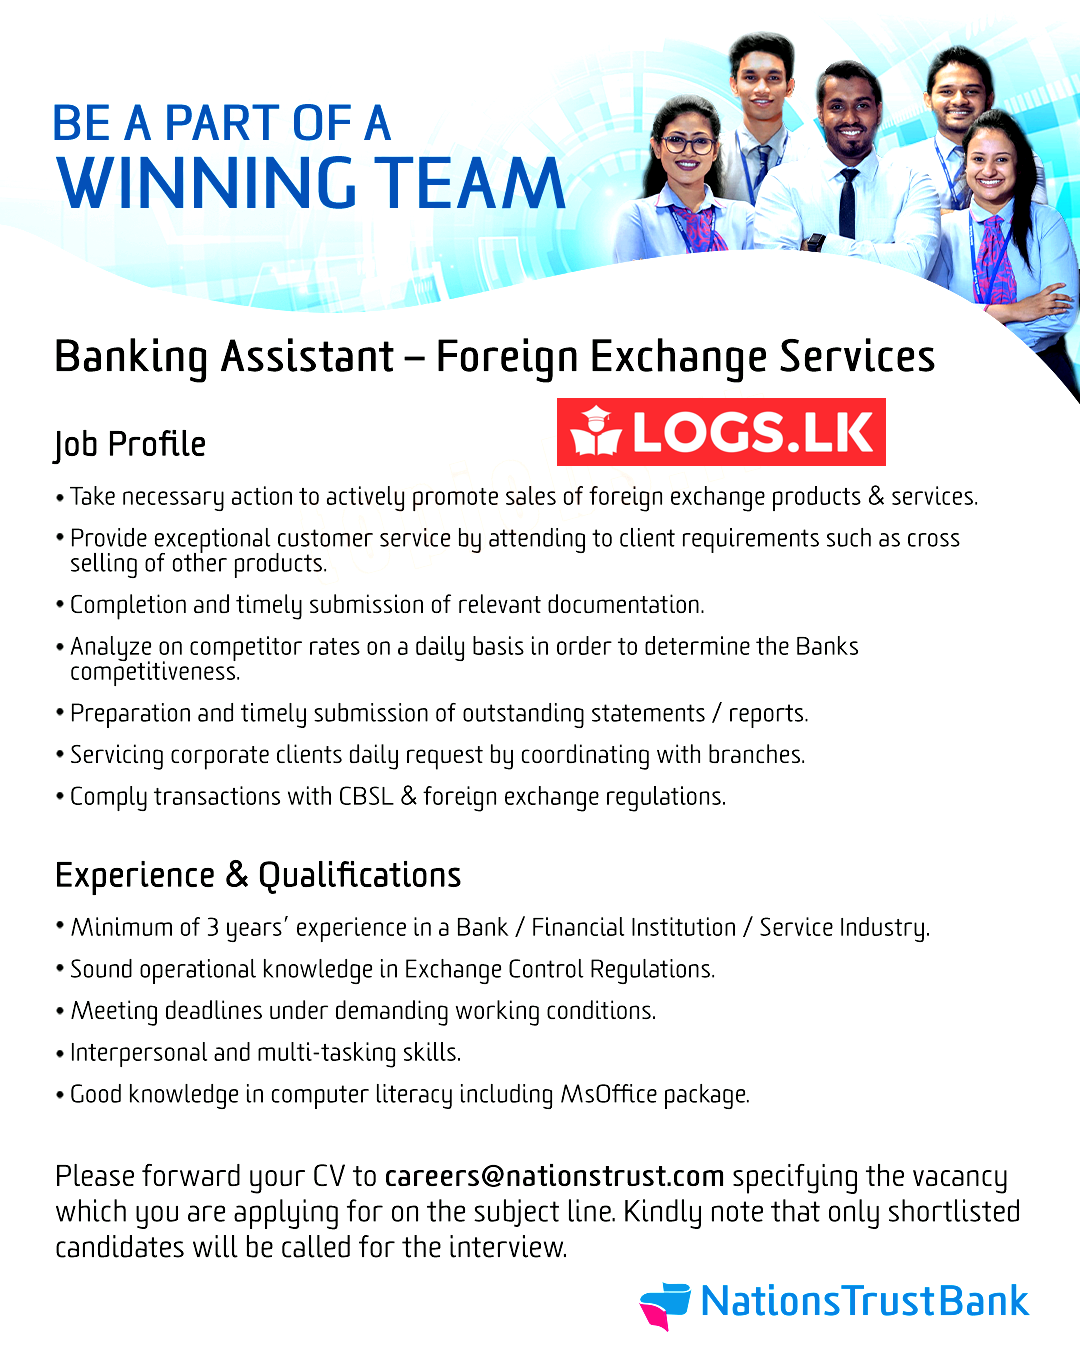 Banking Assistant (Foreign Exchange Services) Job Vacancies - NTB Bank